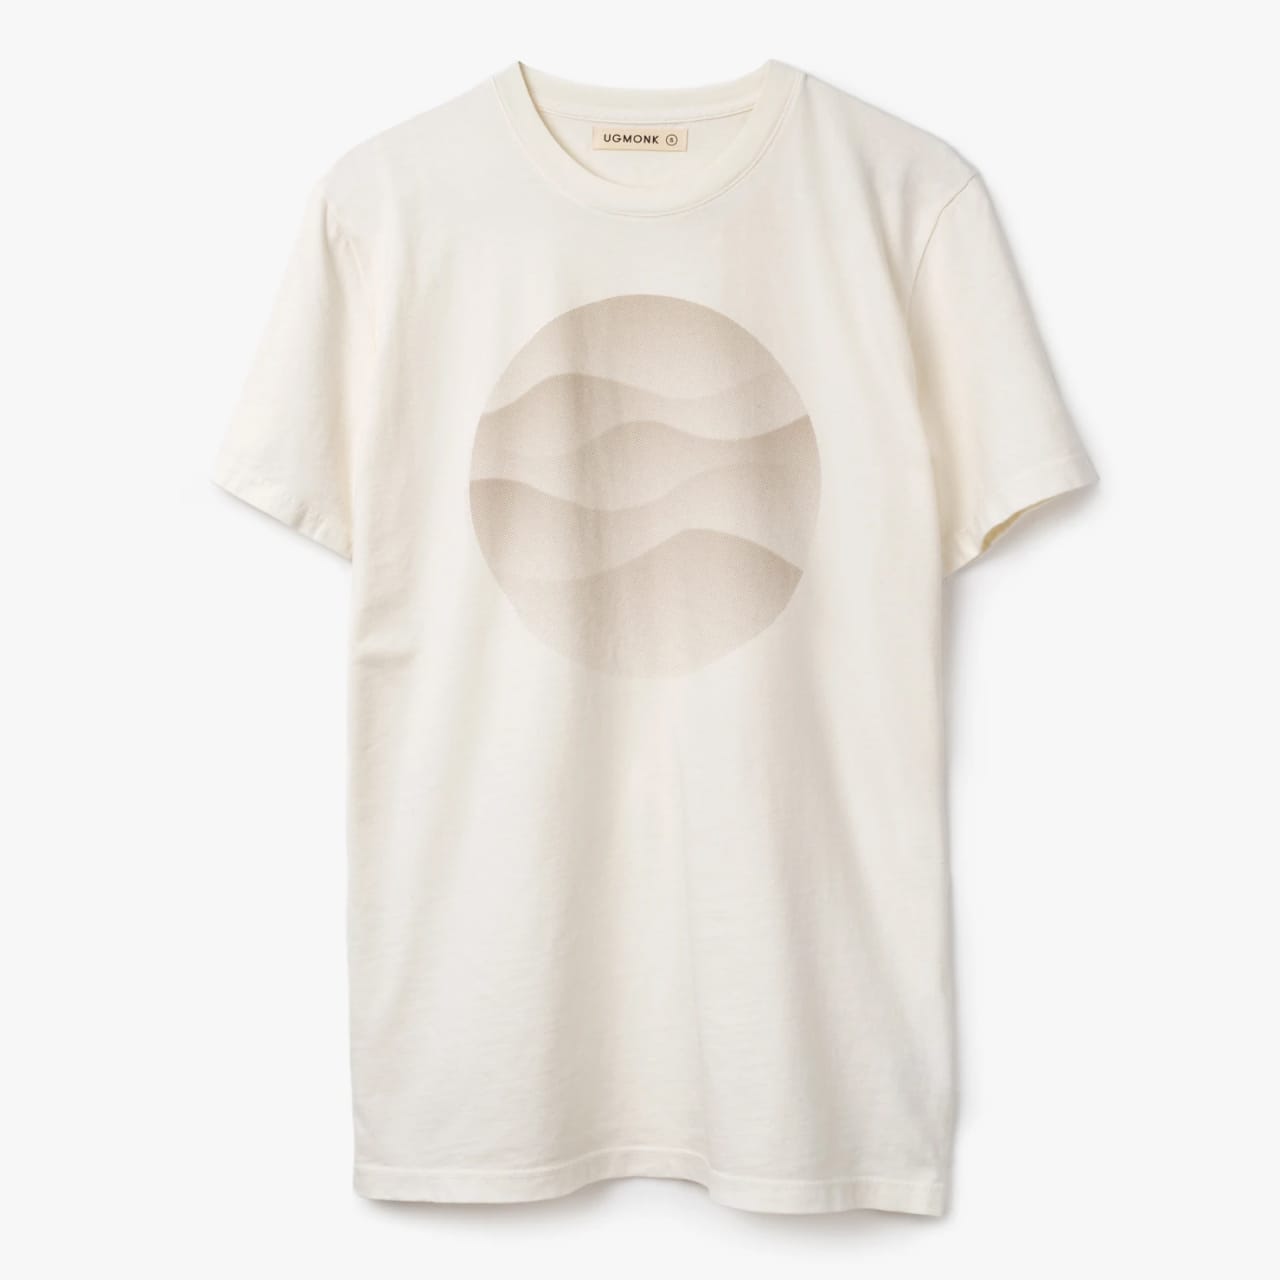 Off-white t-shirt with circular dot illustration on the front of mountain ridges that fade.